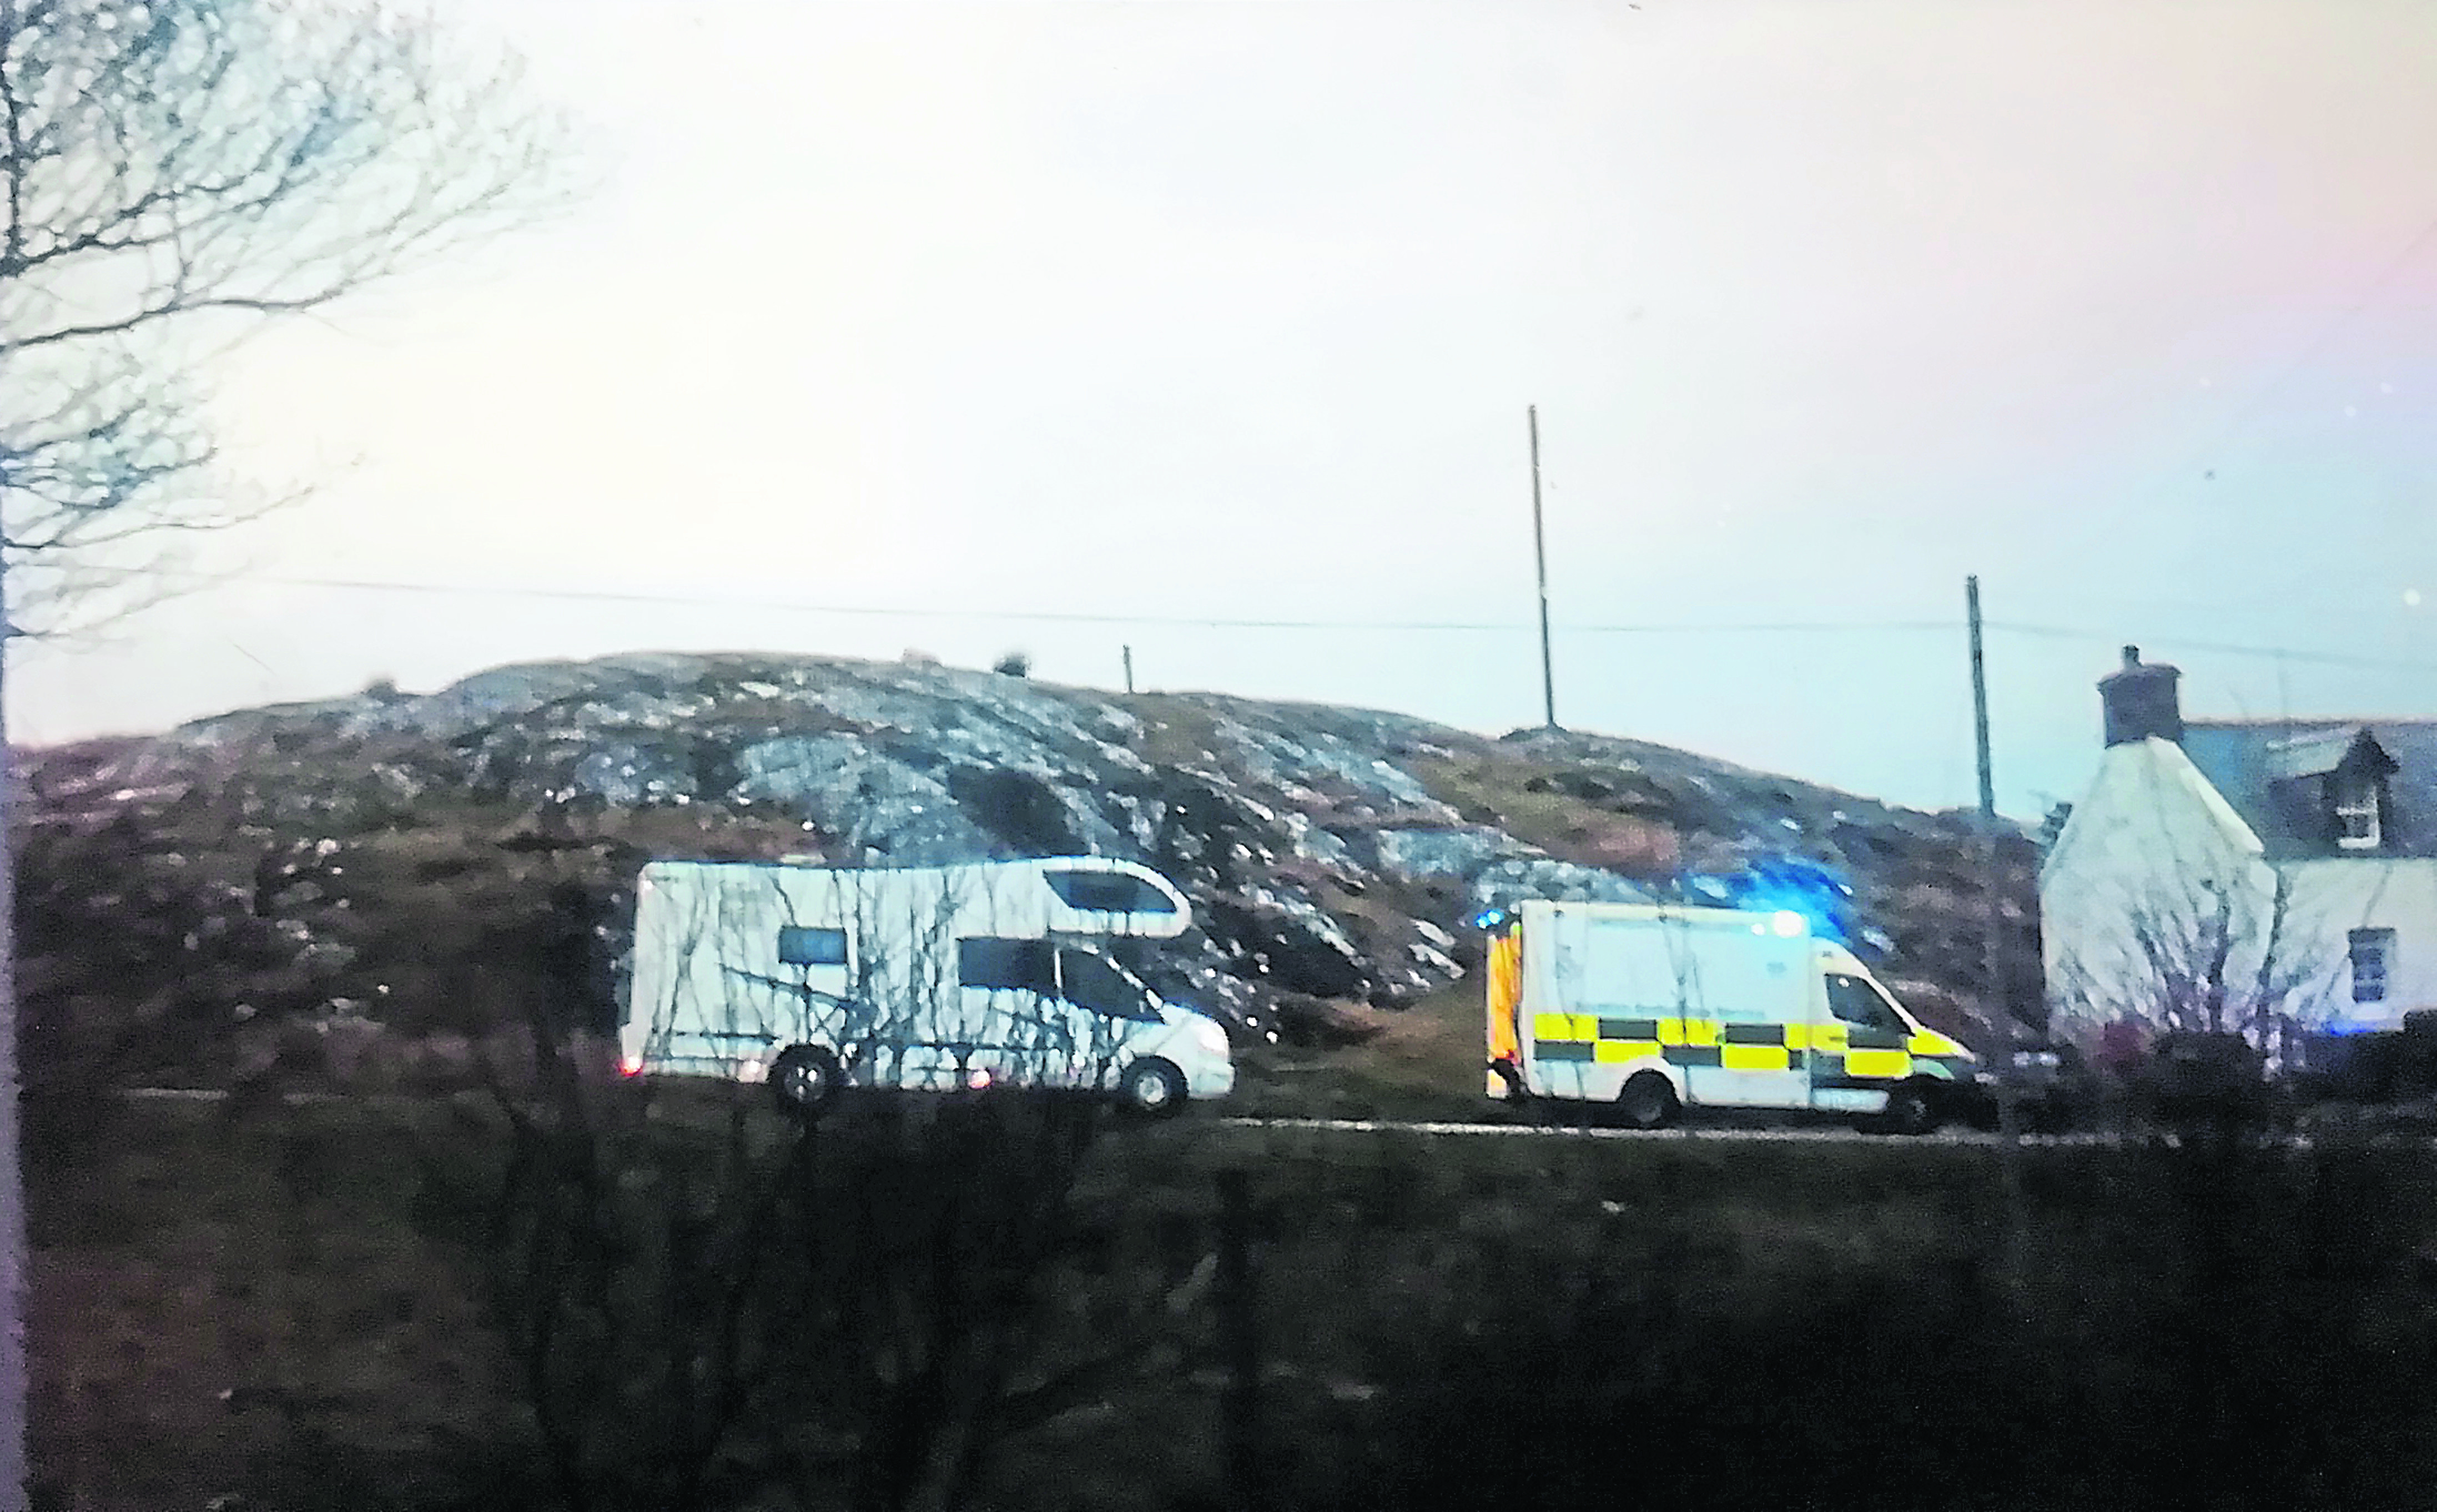 A camper van waits to pass the ambulance on the NC500 route.